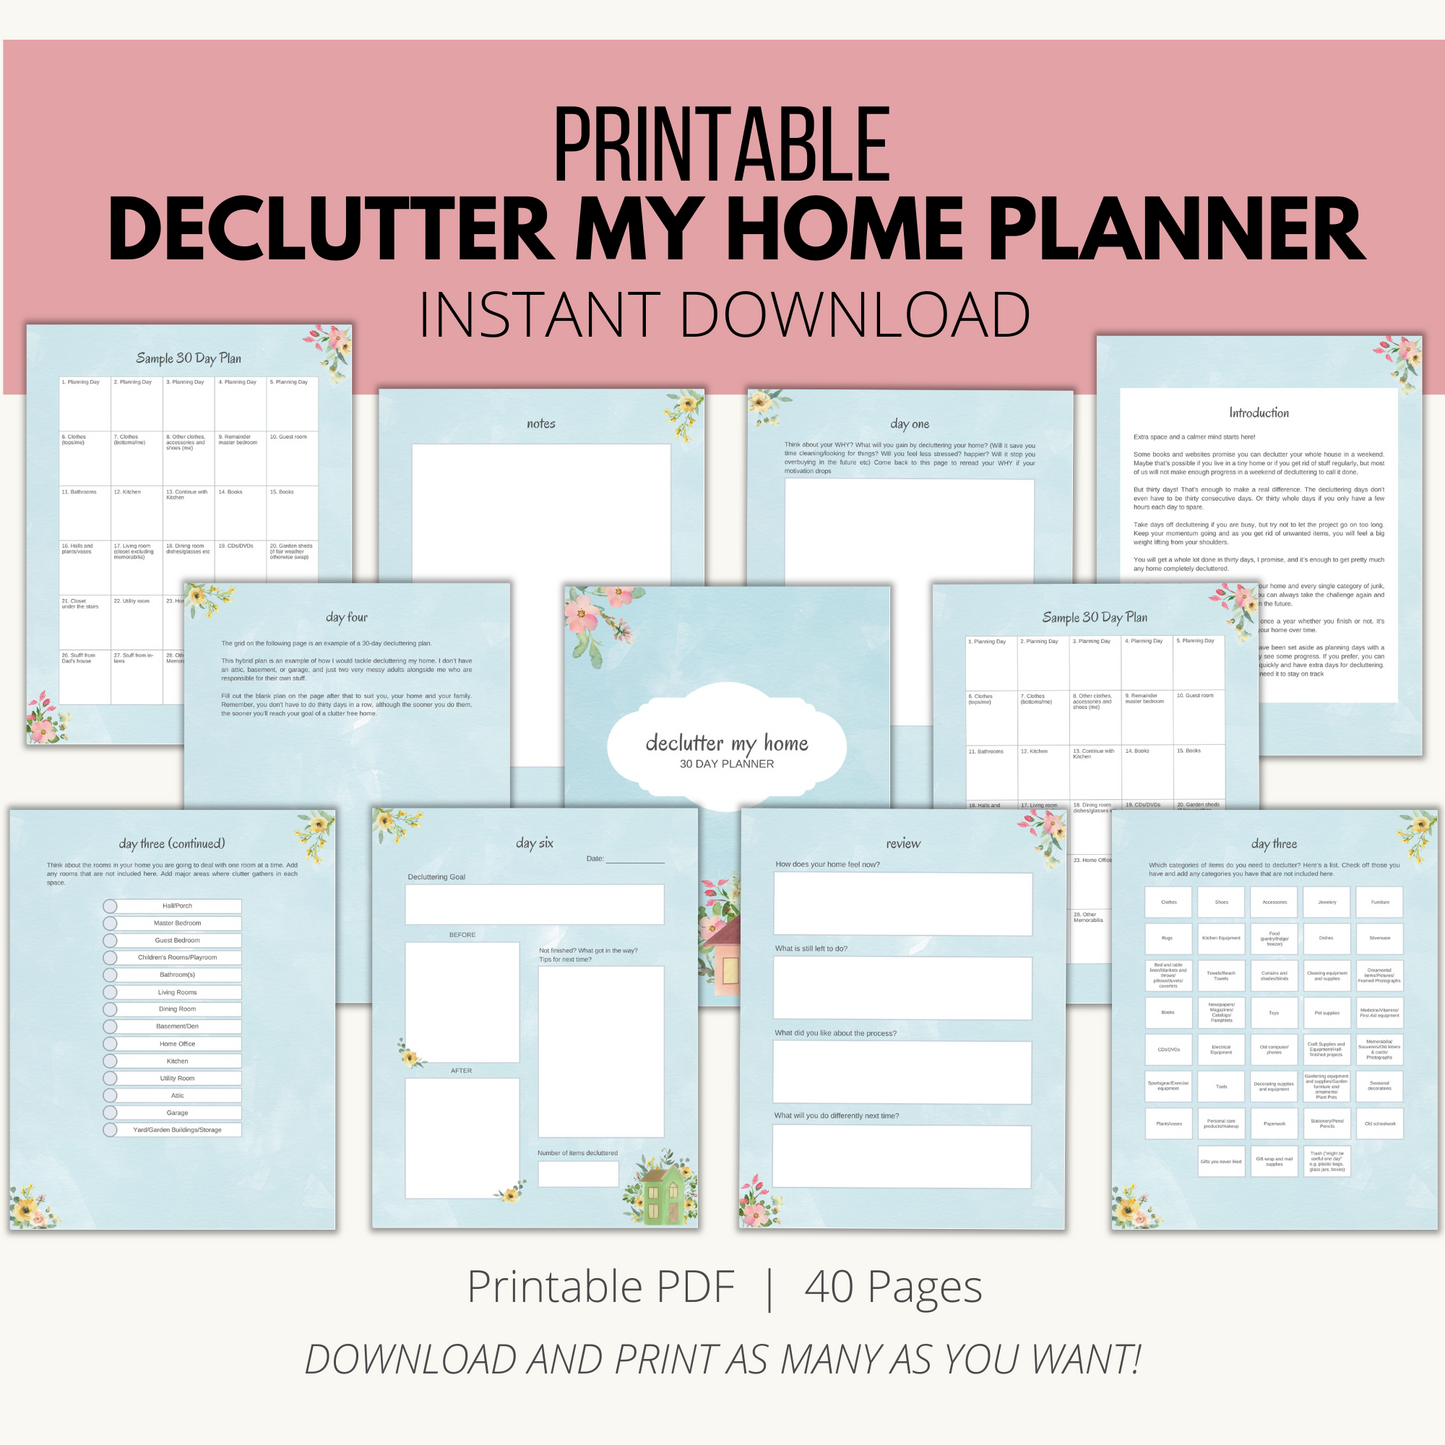 Printable Declutter My Home Planner